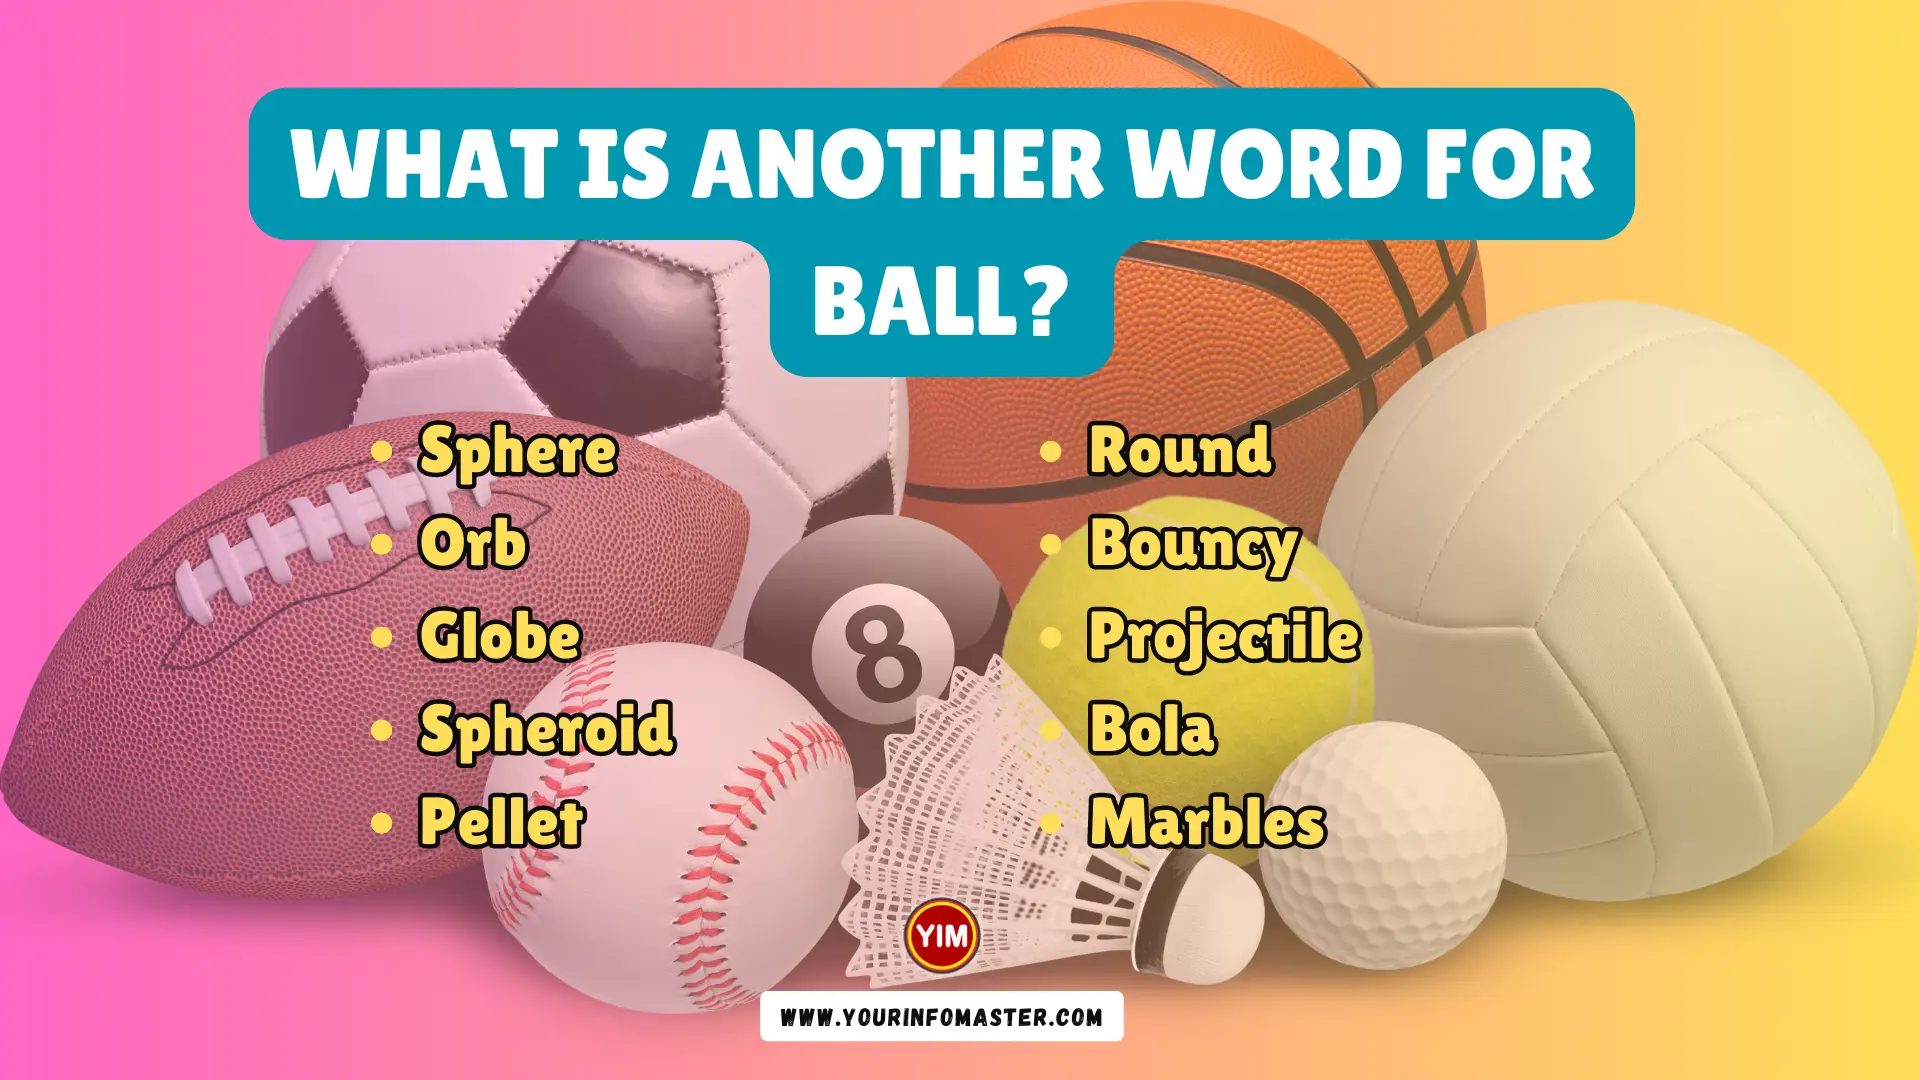 What is another word for Ball